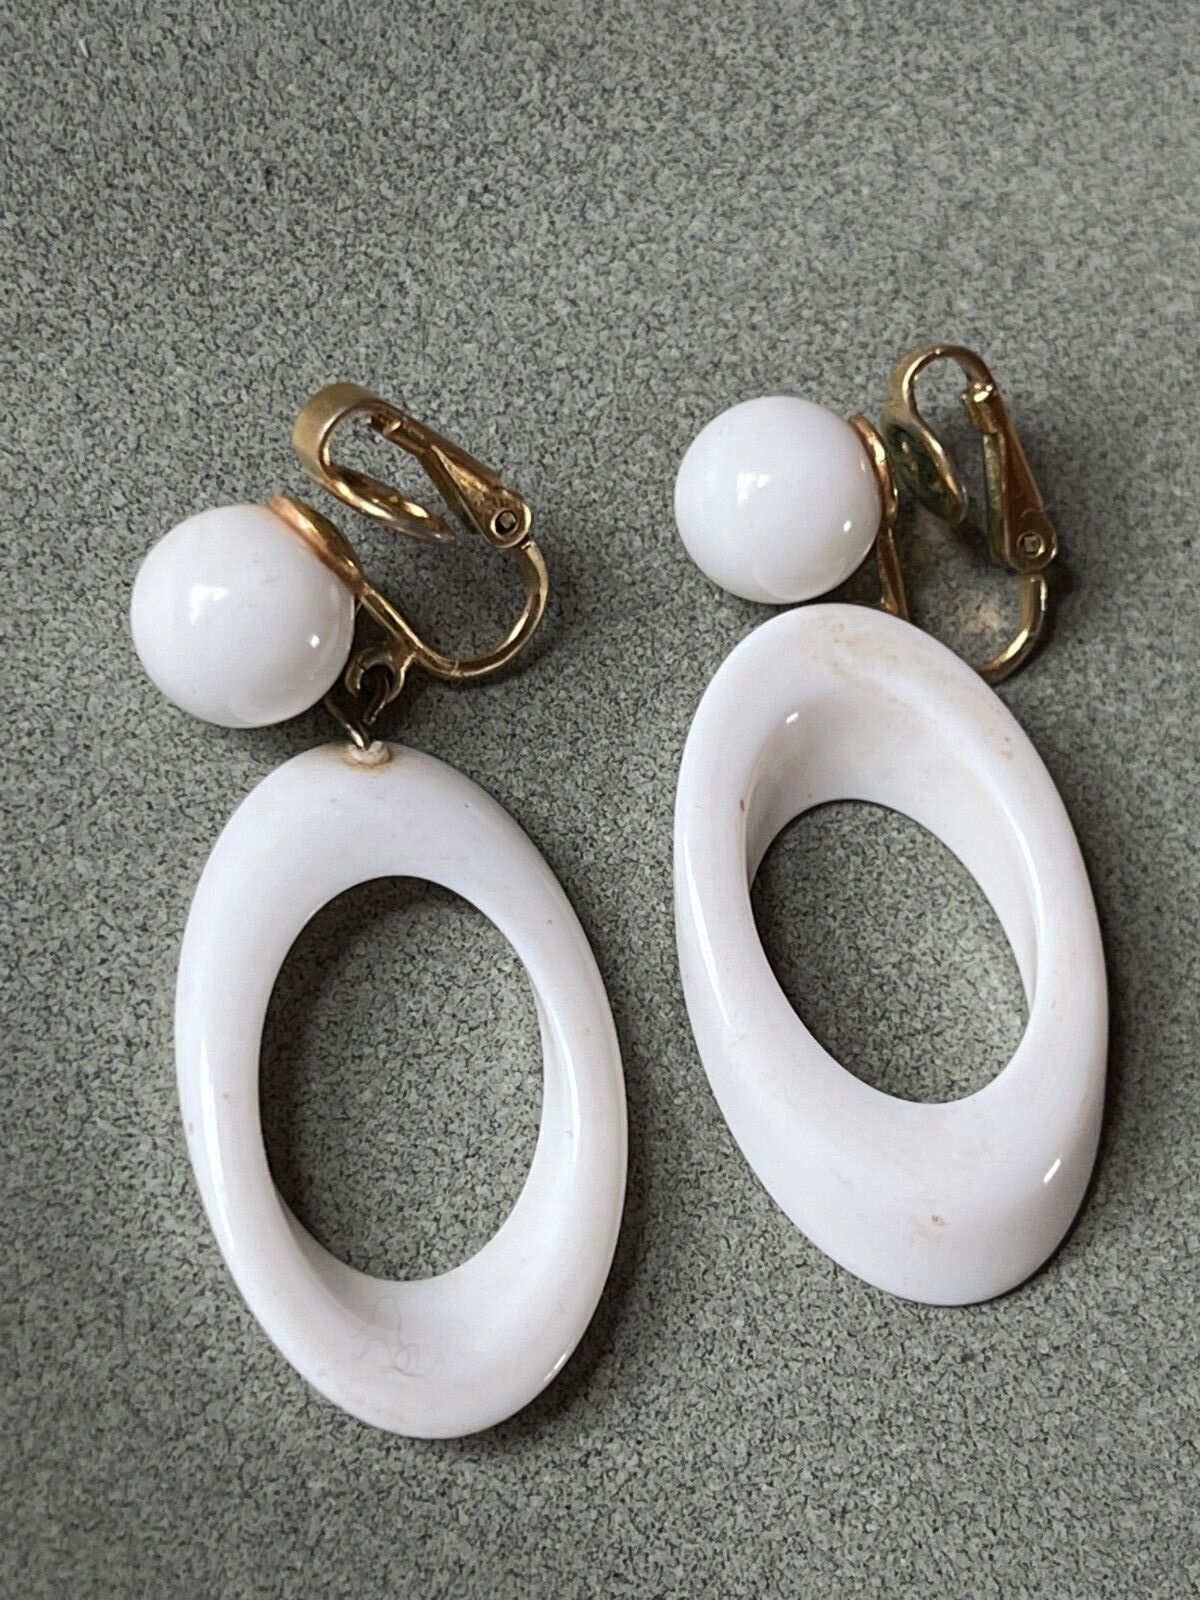 Primary image for Vintage Trifari Signed White Bead & Slanted Open Oval Plastic Clip Earrings – ma